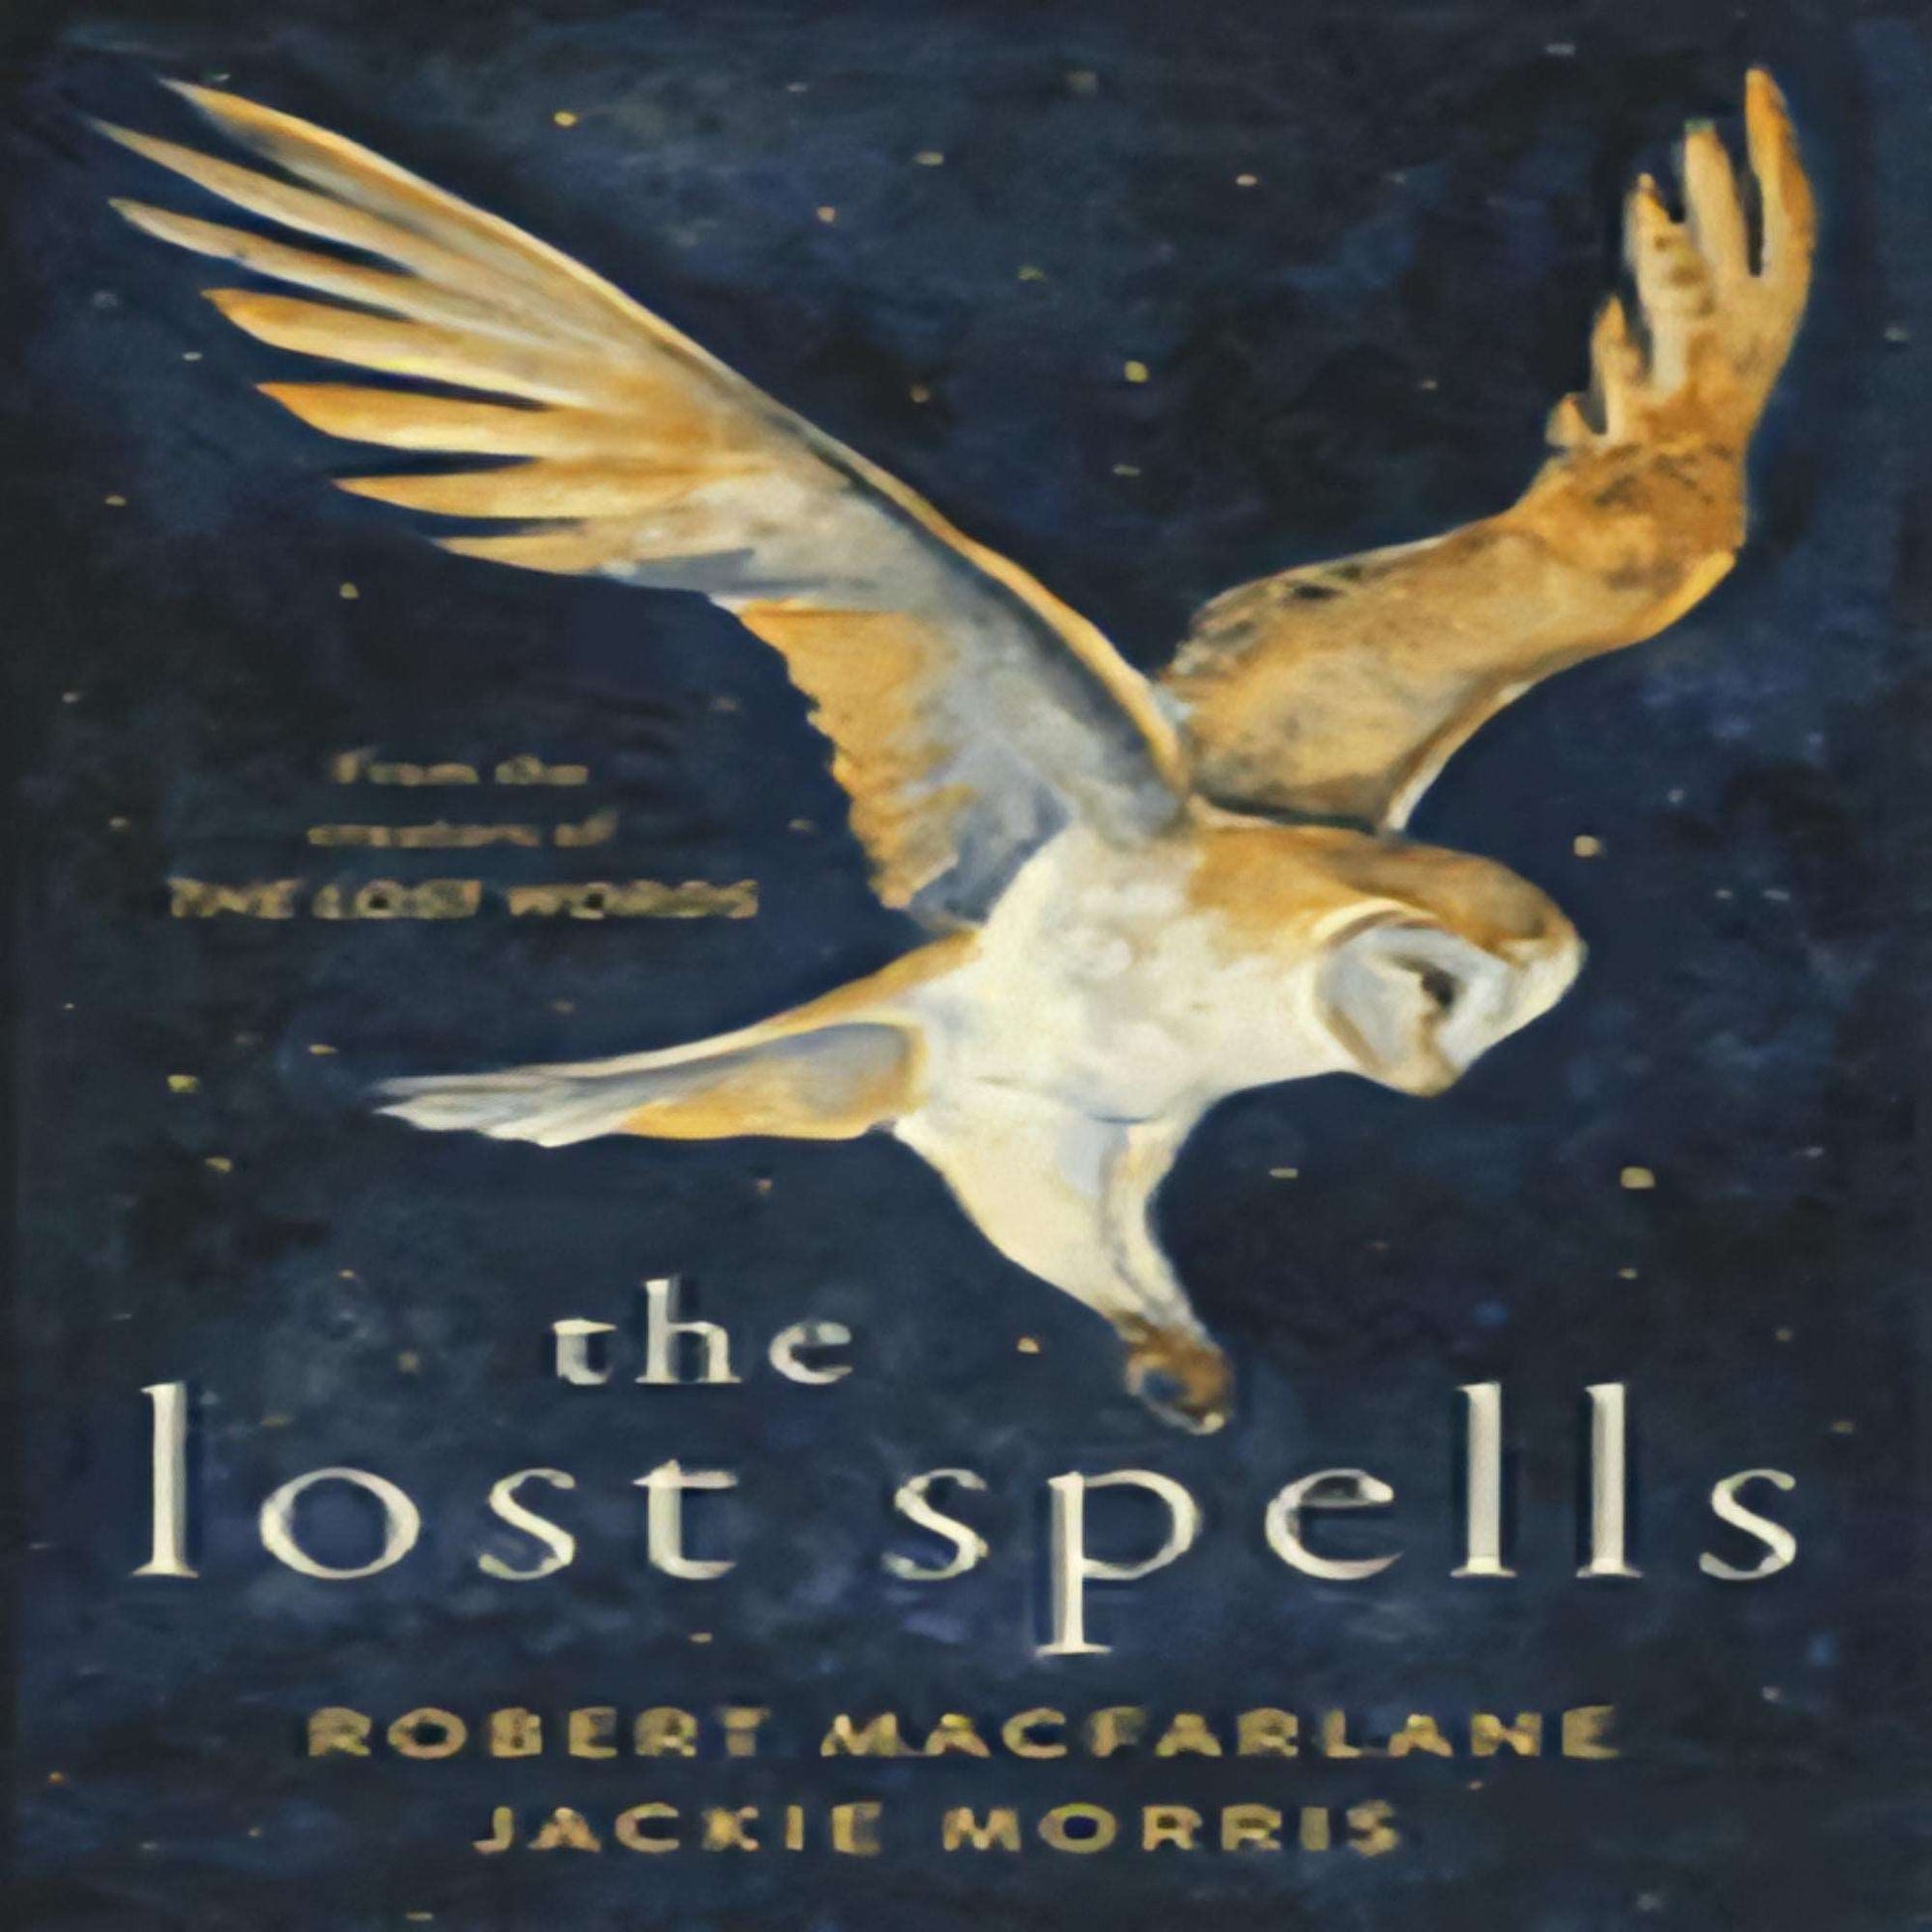 The Lost Spells191-030323-1487007795DPGBOOKSTORE.COM. Today's Bestsellers.